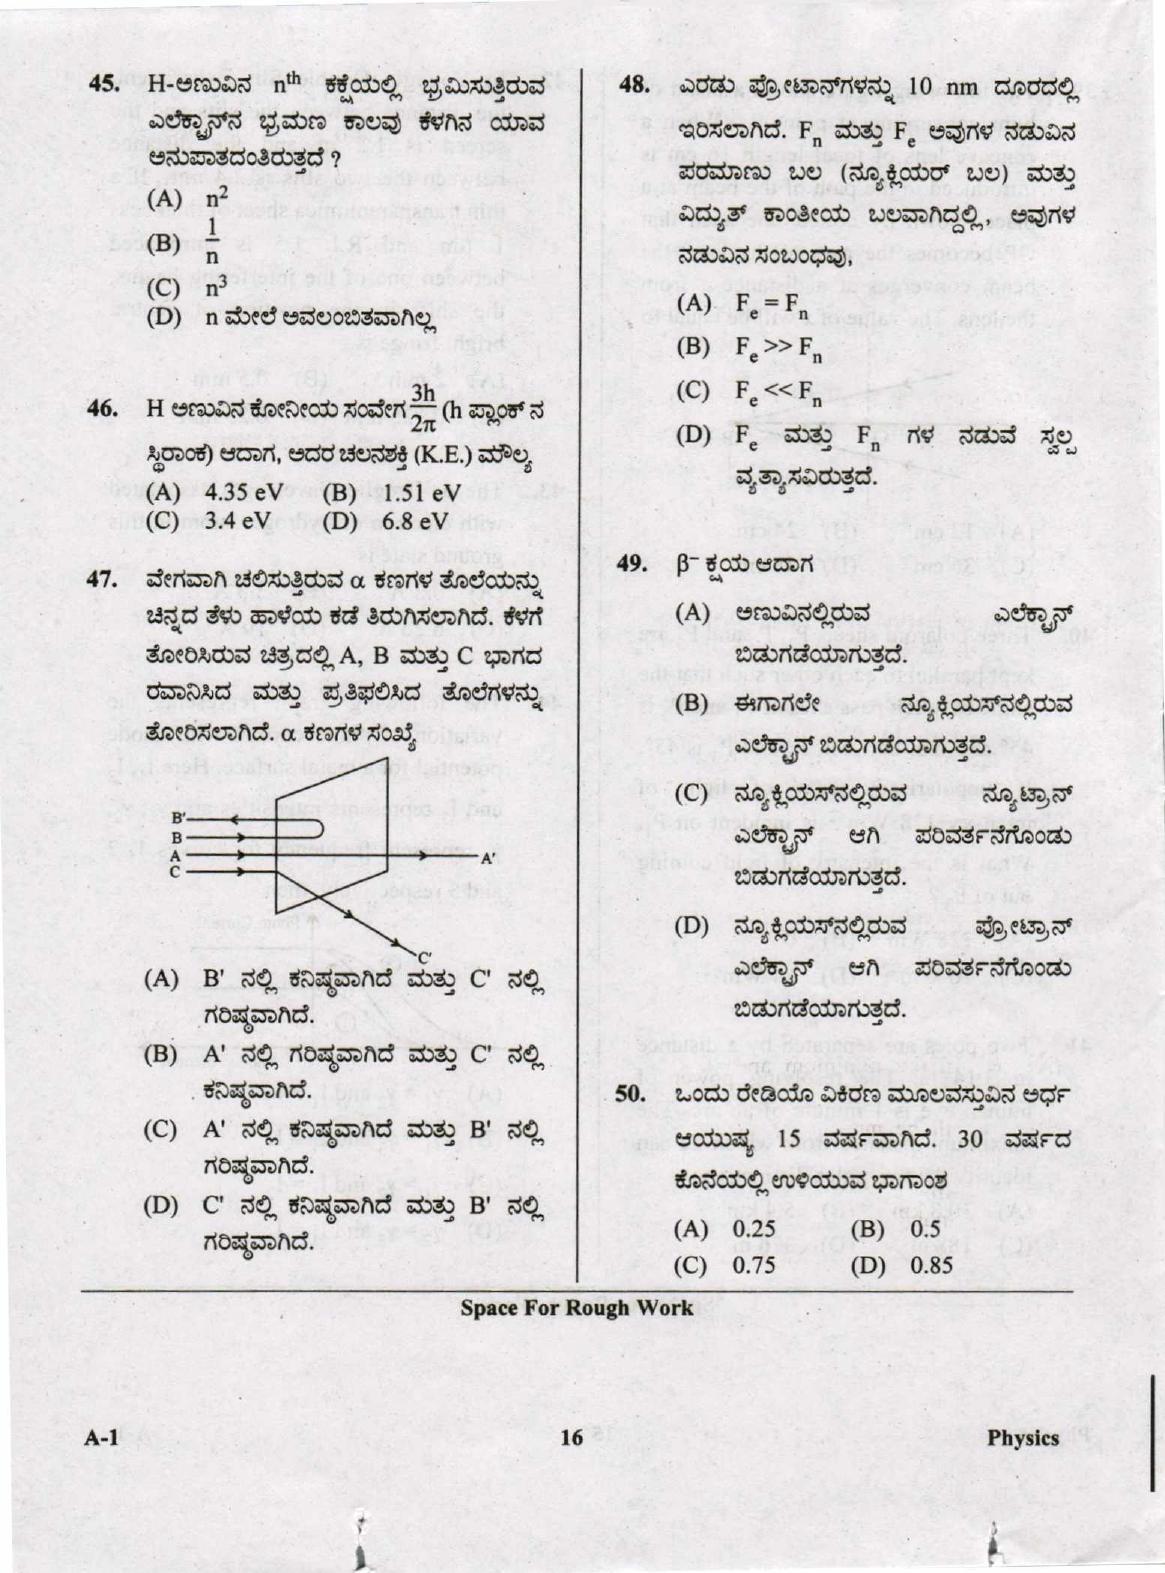 KCET Physics 2020 Question Papers - Page 16